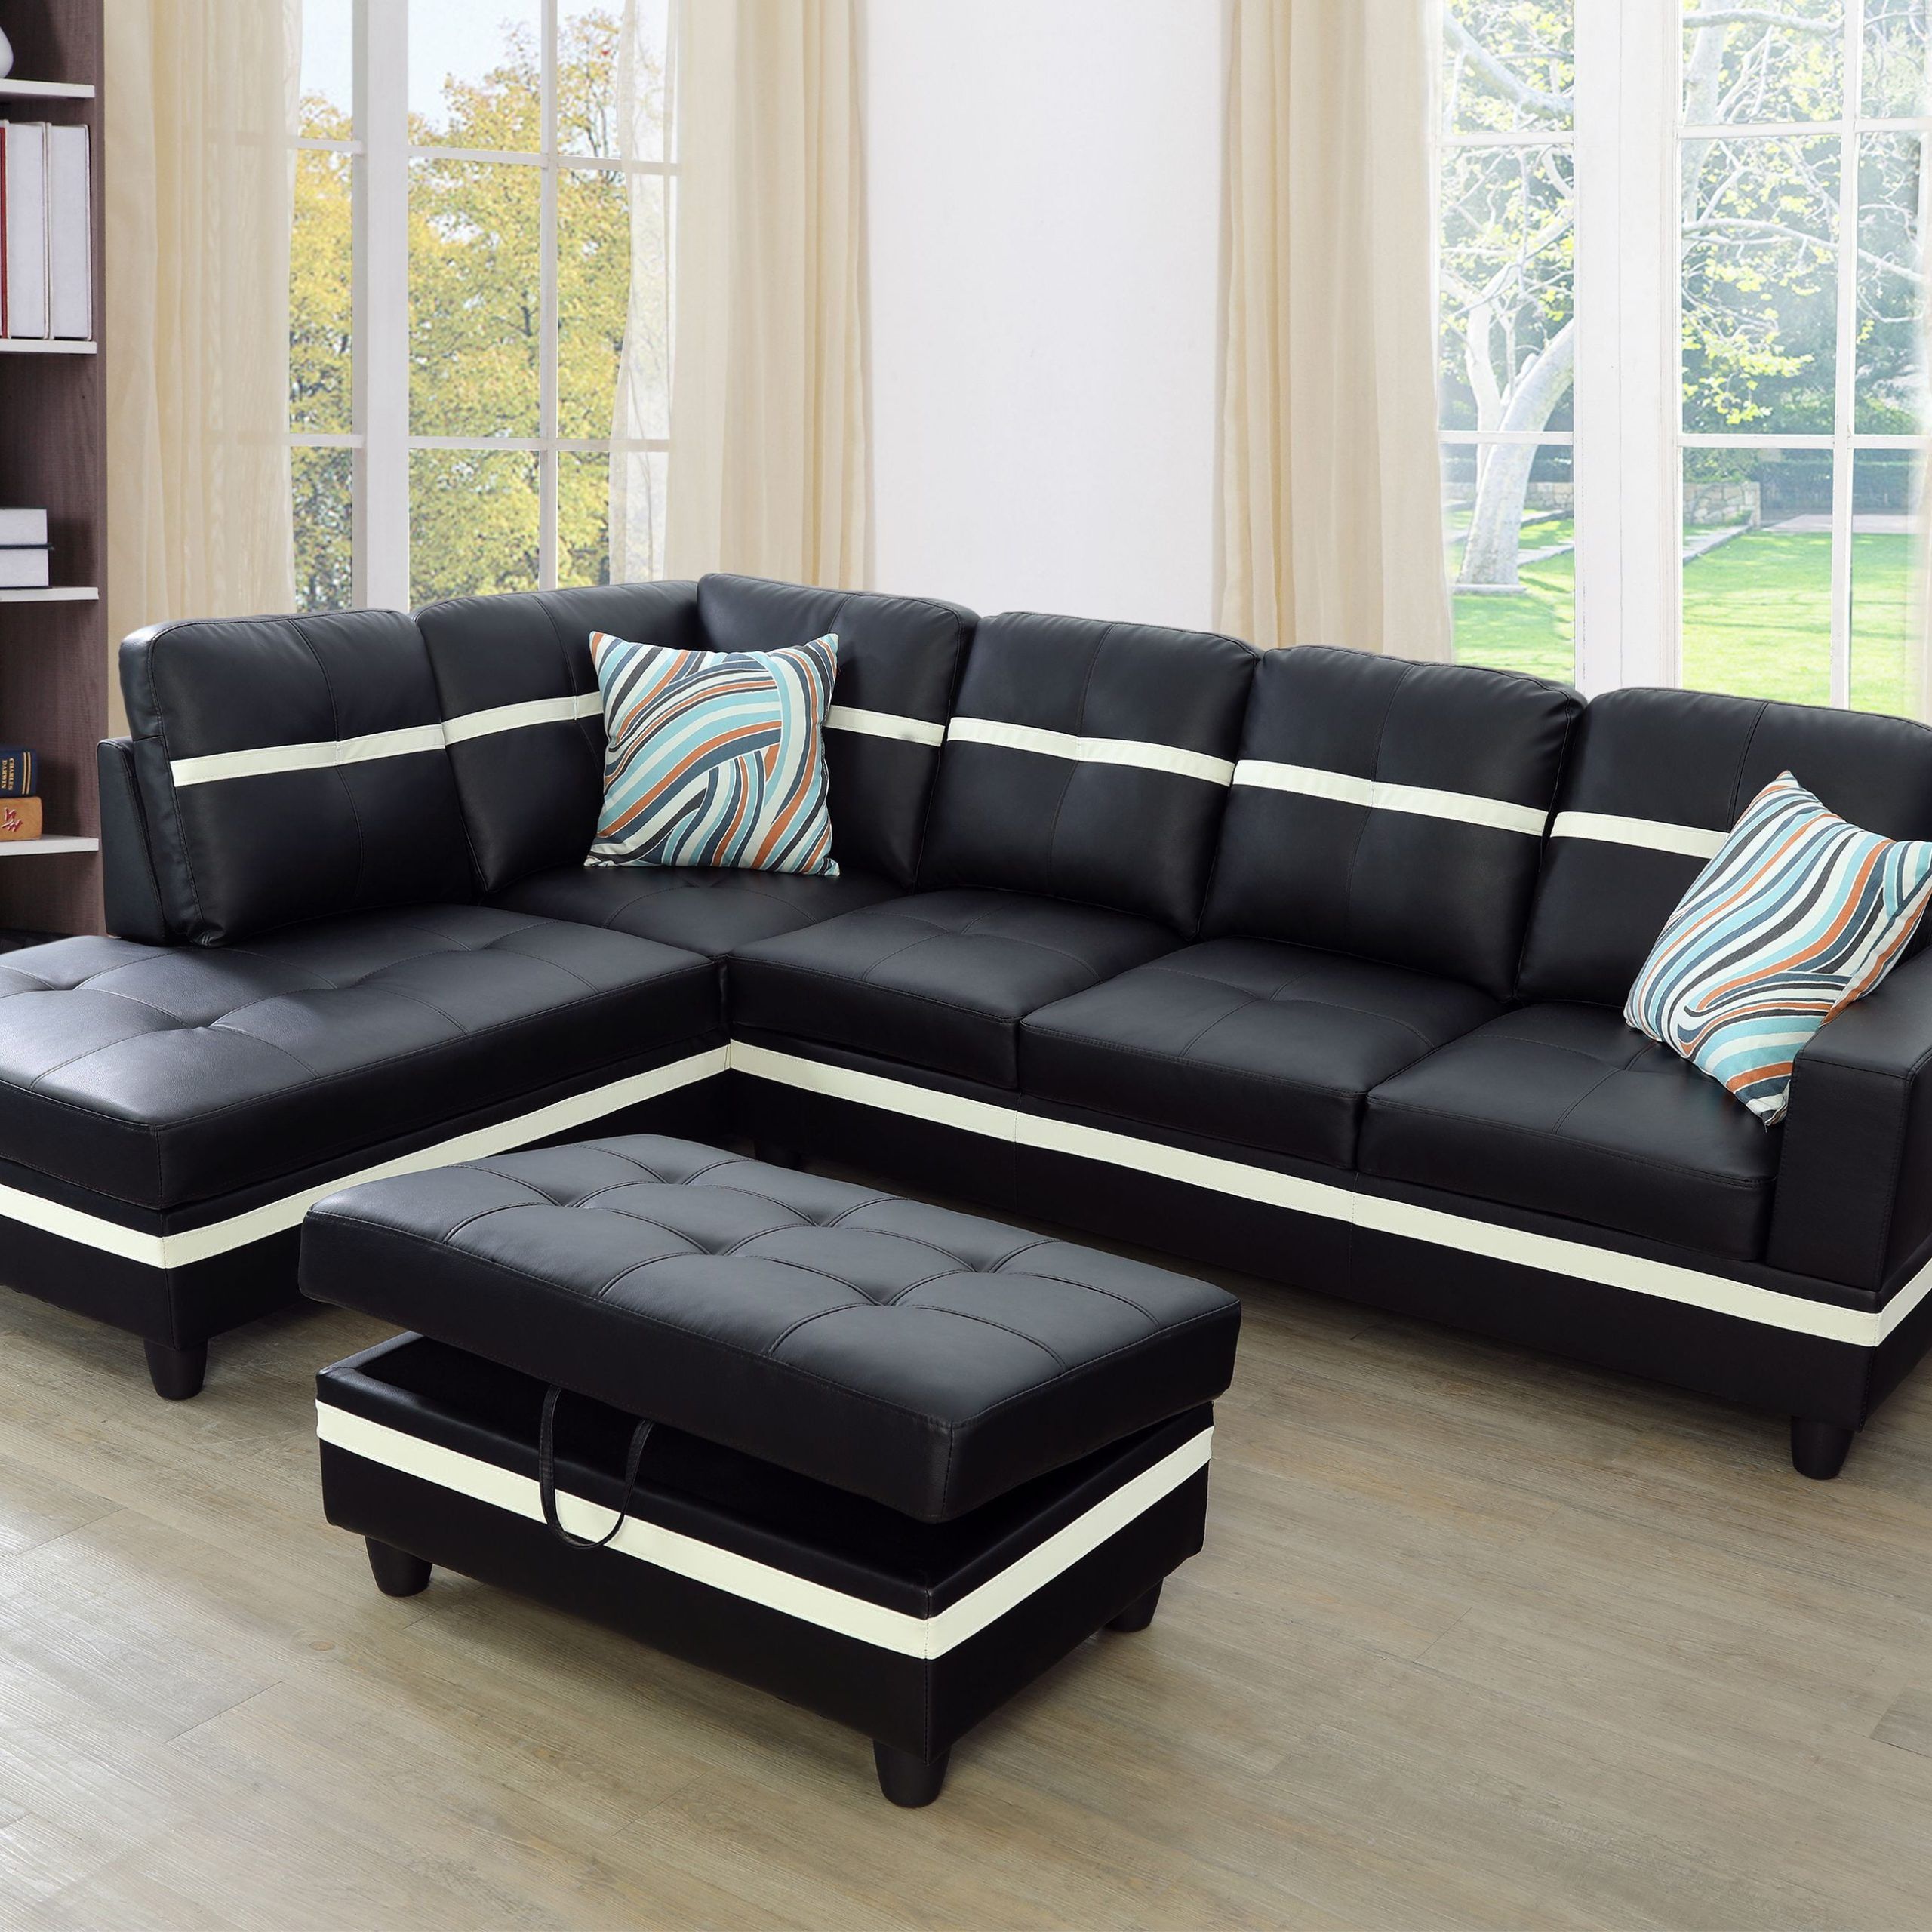 Most Popular Black And White Modern Sectional Sofa Set – Latest Sofa Pictures In 3 Seat L Shaped Sofas In Black (View 14 of 15)